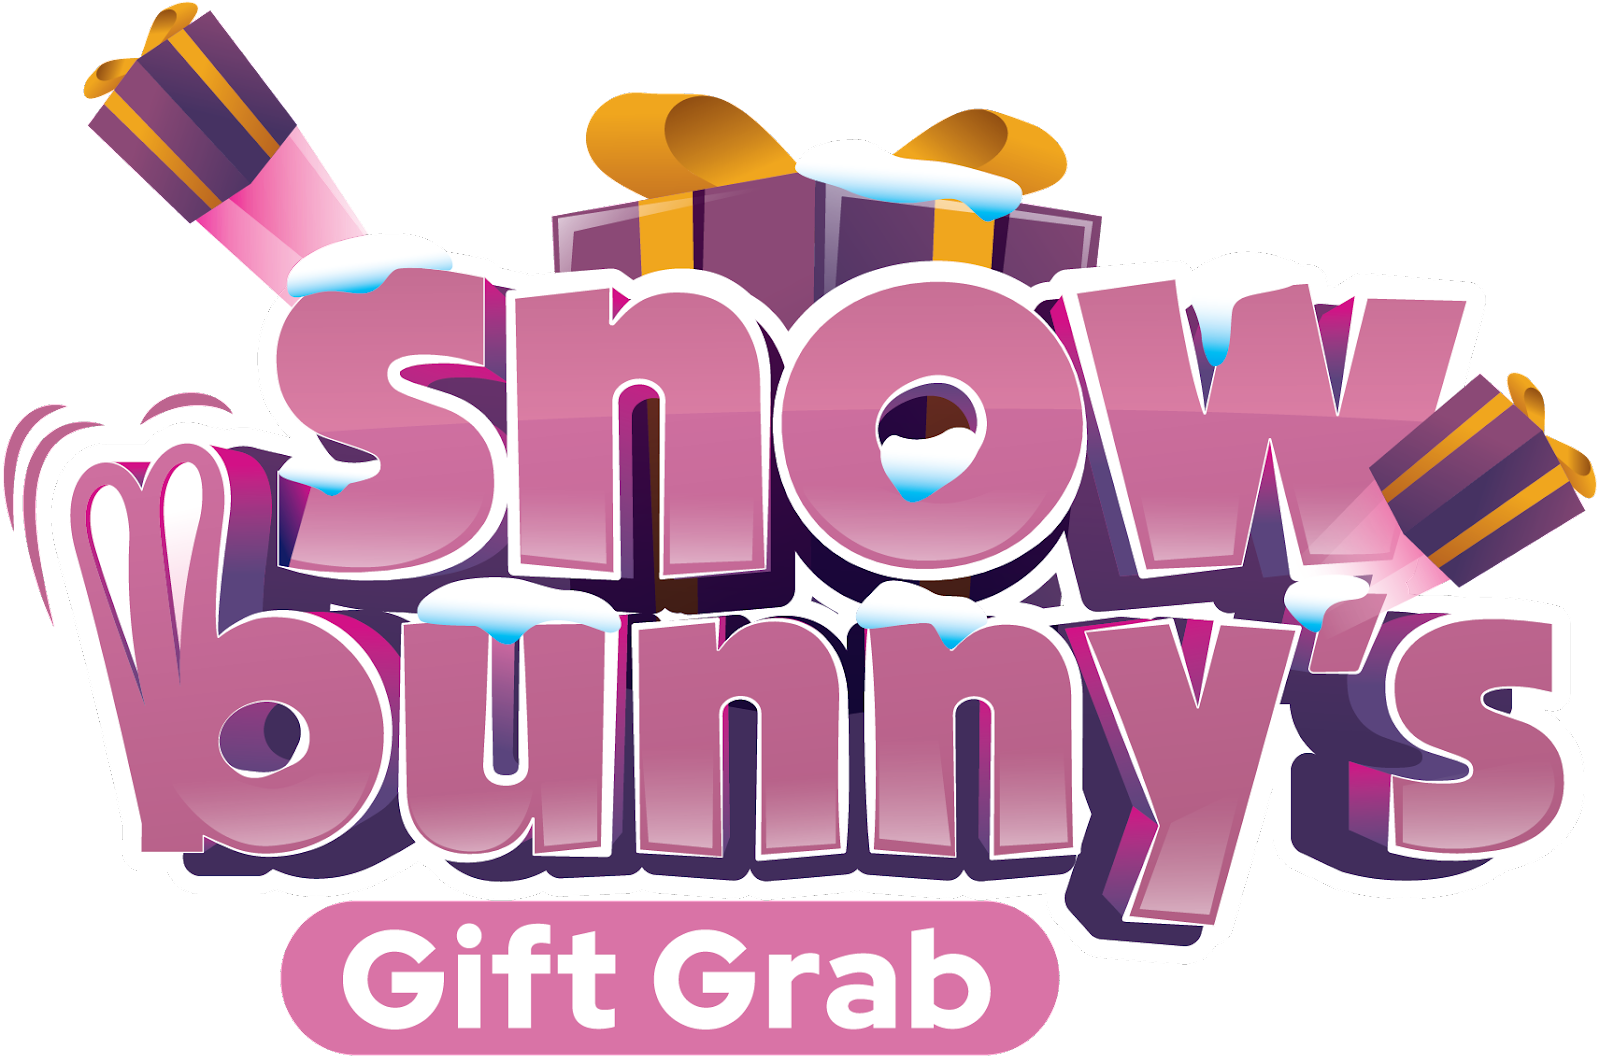 Motorbunny Presents “Snowbunny’s Gift Grab,”  the Free Mobile Game for Enhanced Riding Experiences